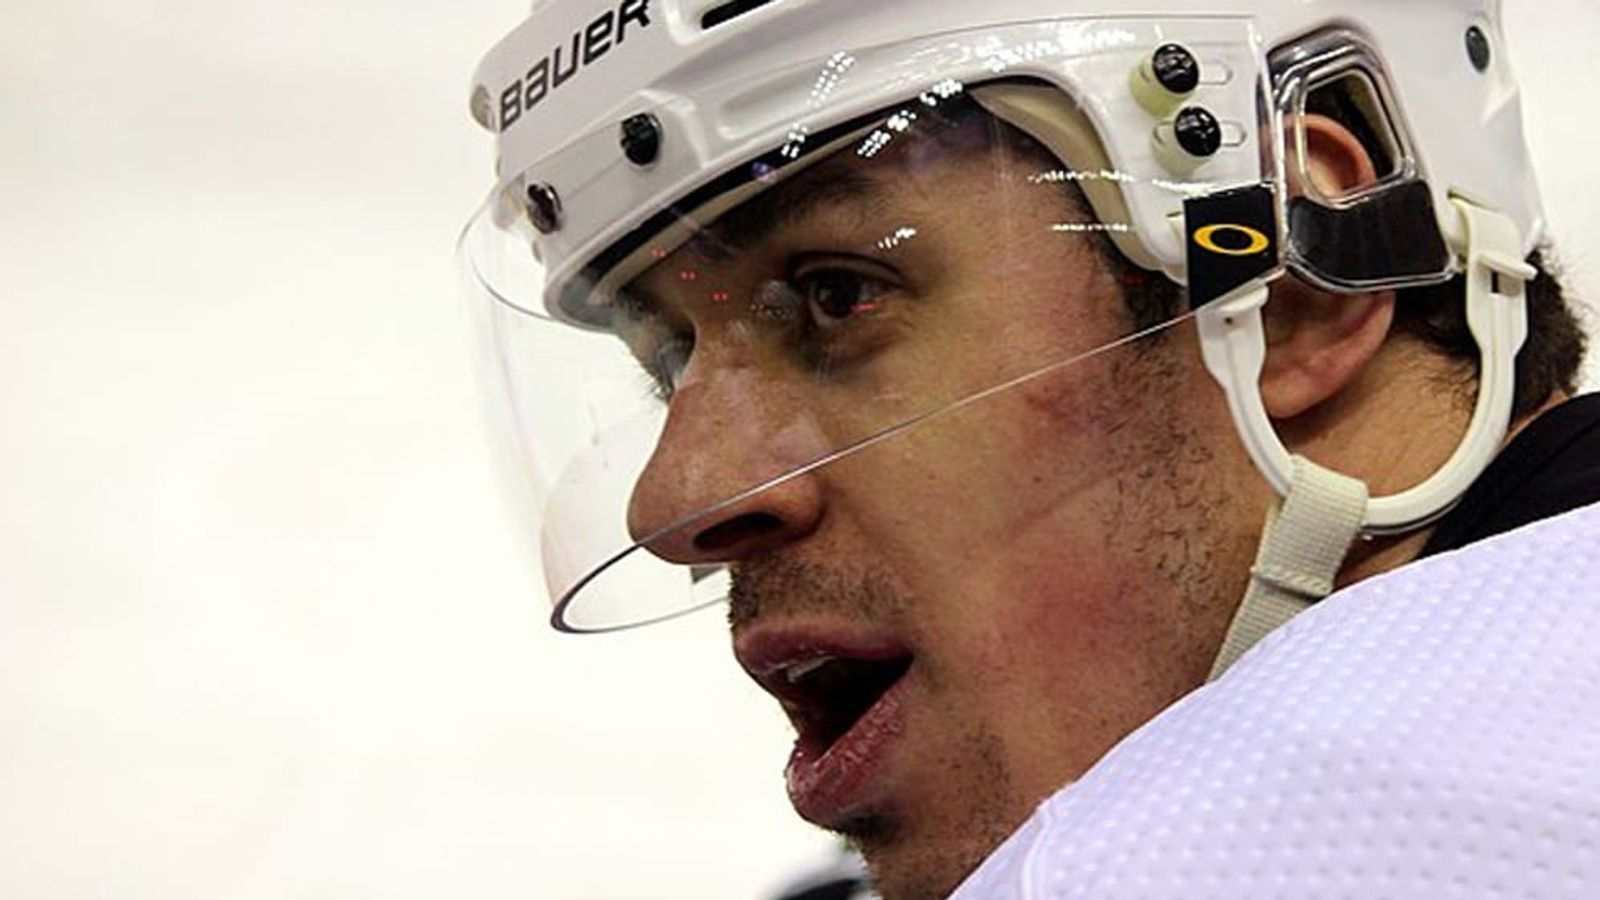 Pros and Cons of Signing Evgeni Malkin